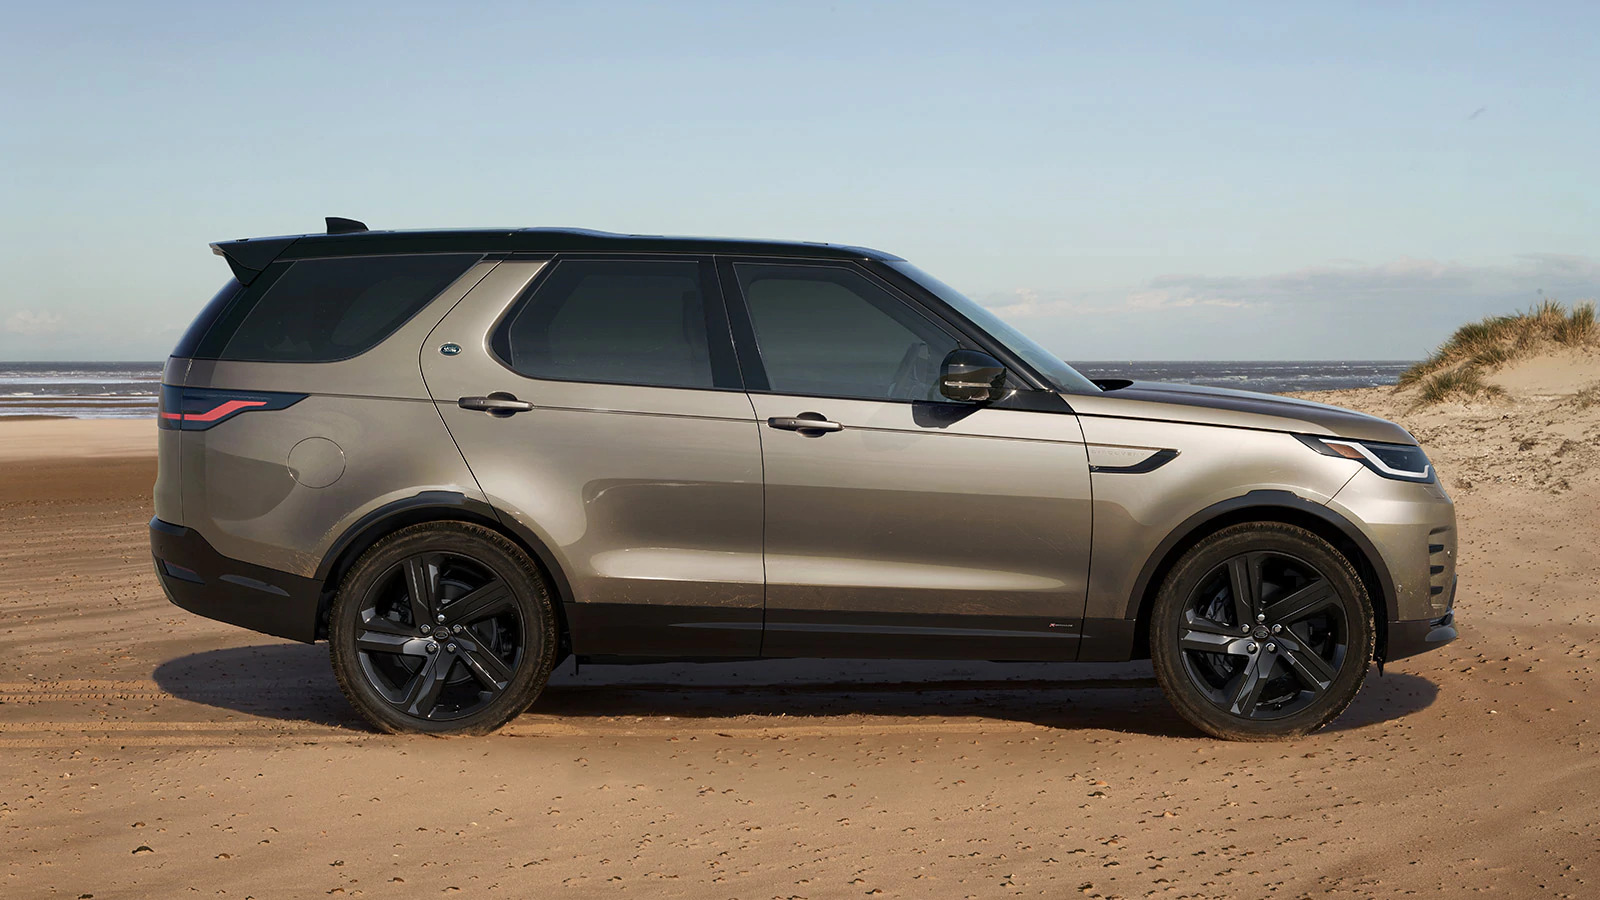 2021 Land Rover Discovery